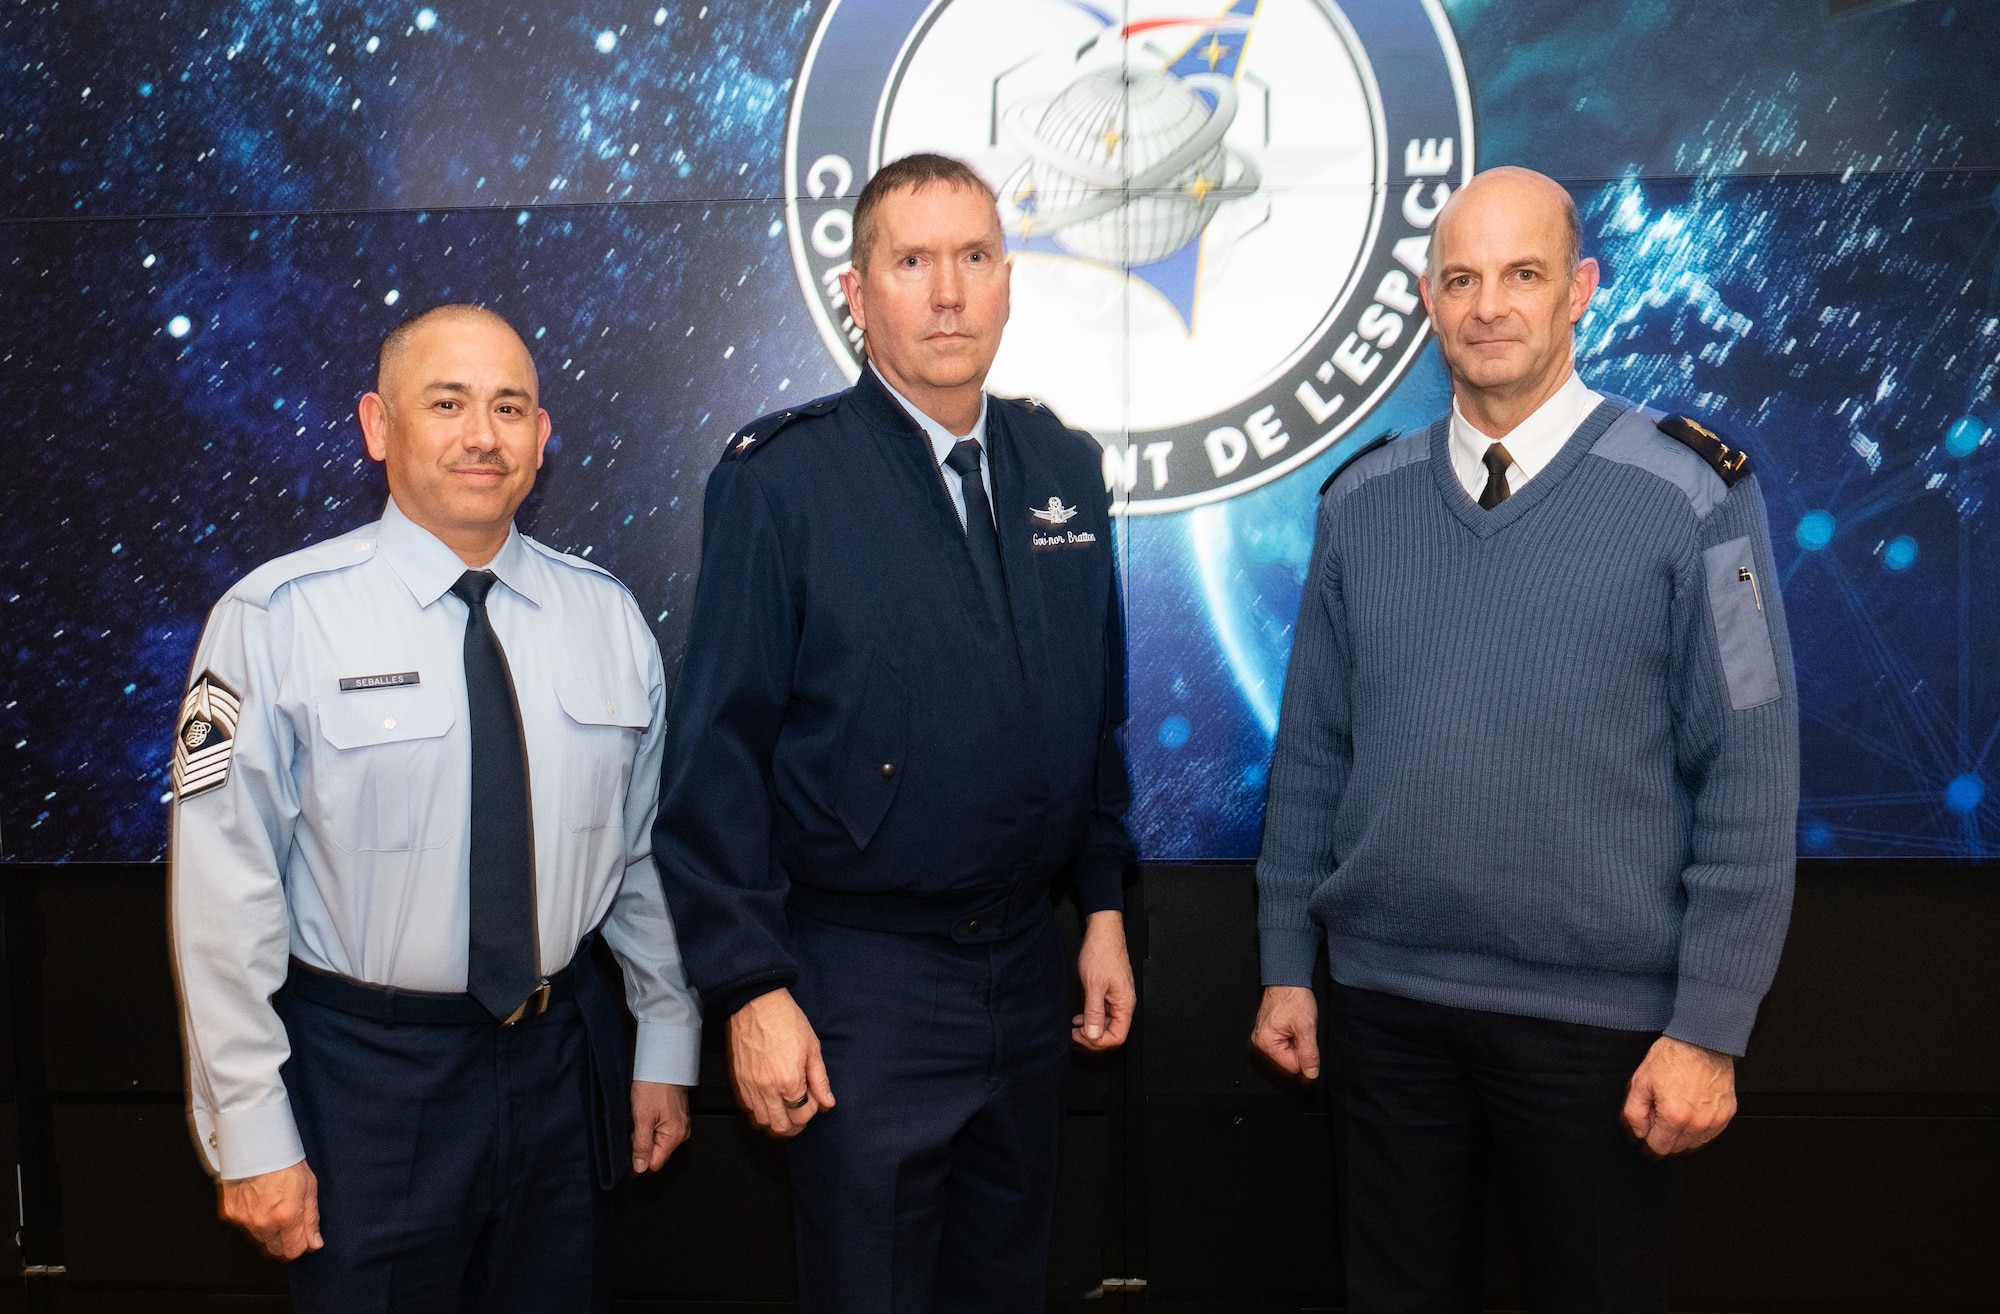 (From left to right) Chief Master Sgt. James Seballes, senior enlisted leader of Space Training and Readiness Command, Maj. Gen. Shawn Bratton, commander of STARCOM, and French Maj. Gen. Philippe Adam, commander of French Space Command, pose for a photo at the Ministry of Armed Forces in Paris, France, Jan. 30, 2023. Their discussions focused on advancing shared objectives including better information sharing, developing mutual education and training opportunities, and advancing toward substantive combined operations in the space domain. (U.S. Air Force photo by 1st Lt. Charles Rivezzo)